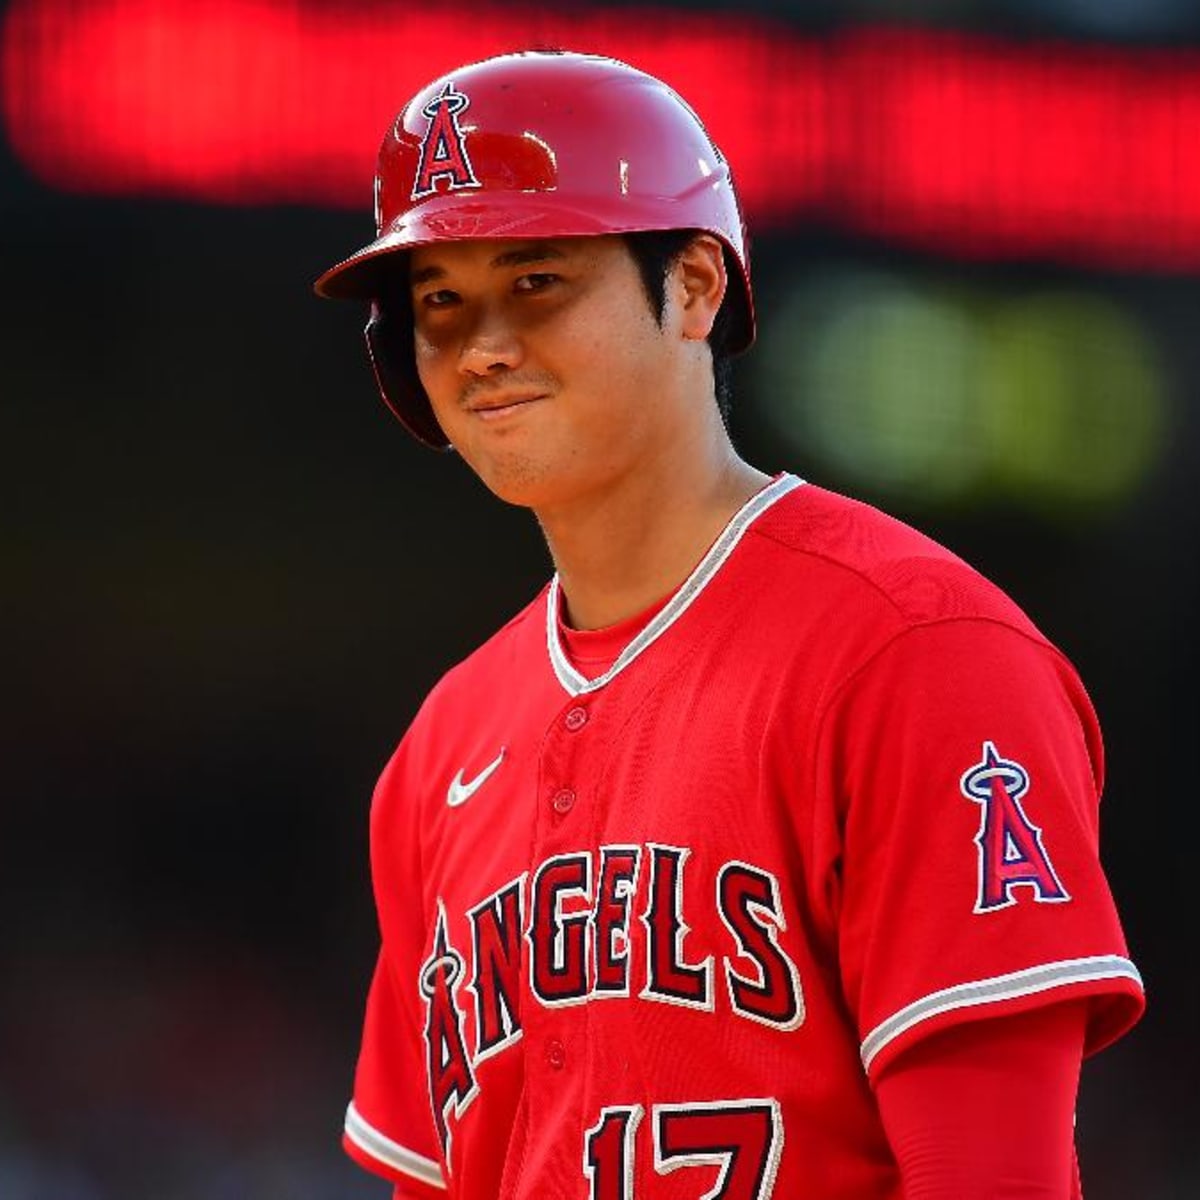 Yankees made serious trade offer for Shohei Ohtani